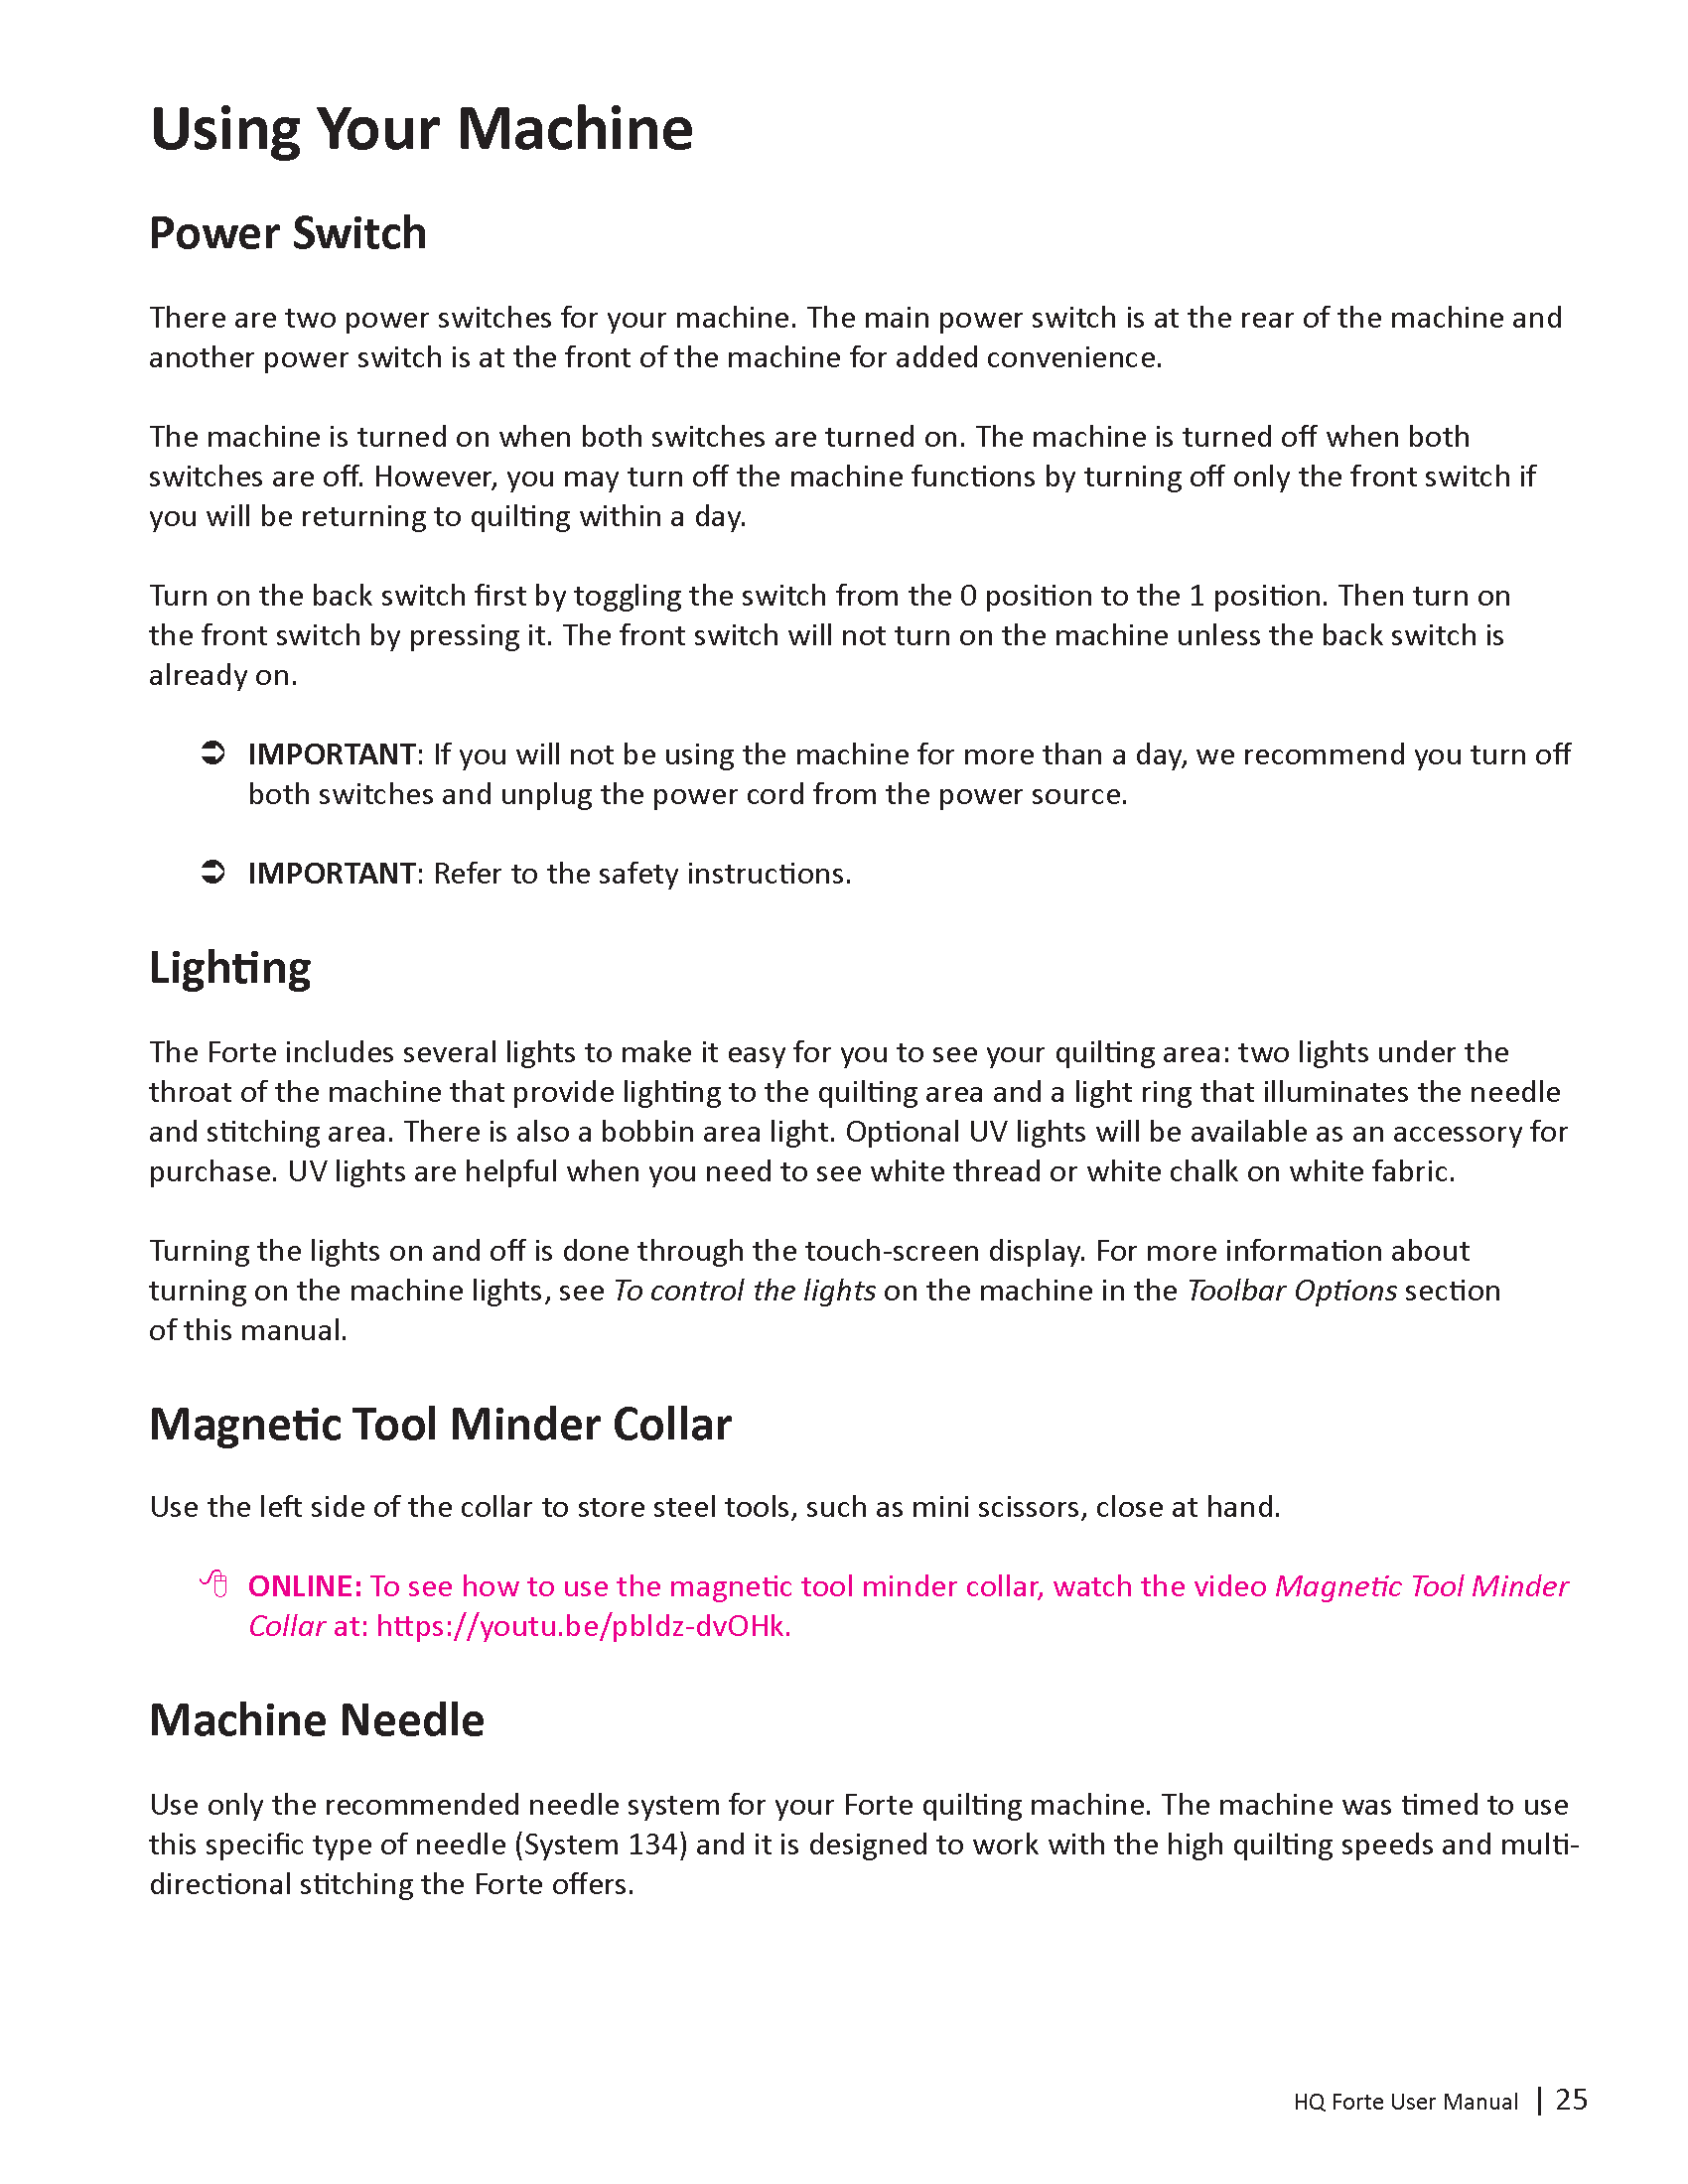 HQ-Forte-User-Manual-ALL-2_Page_26.png